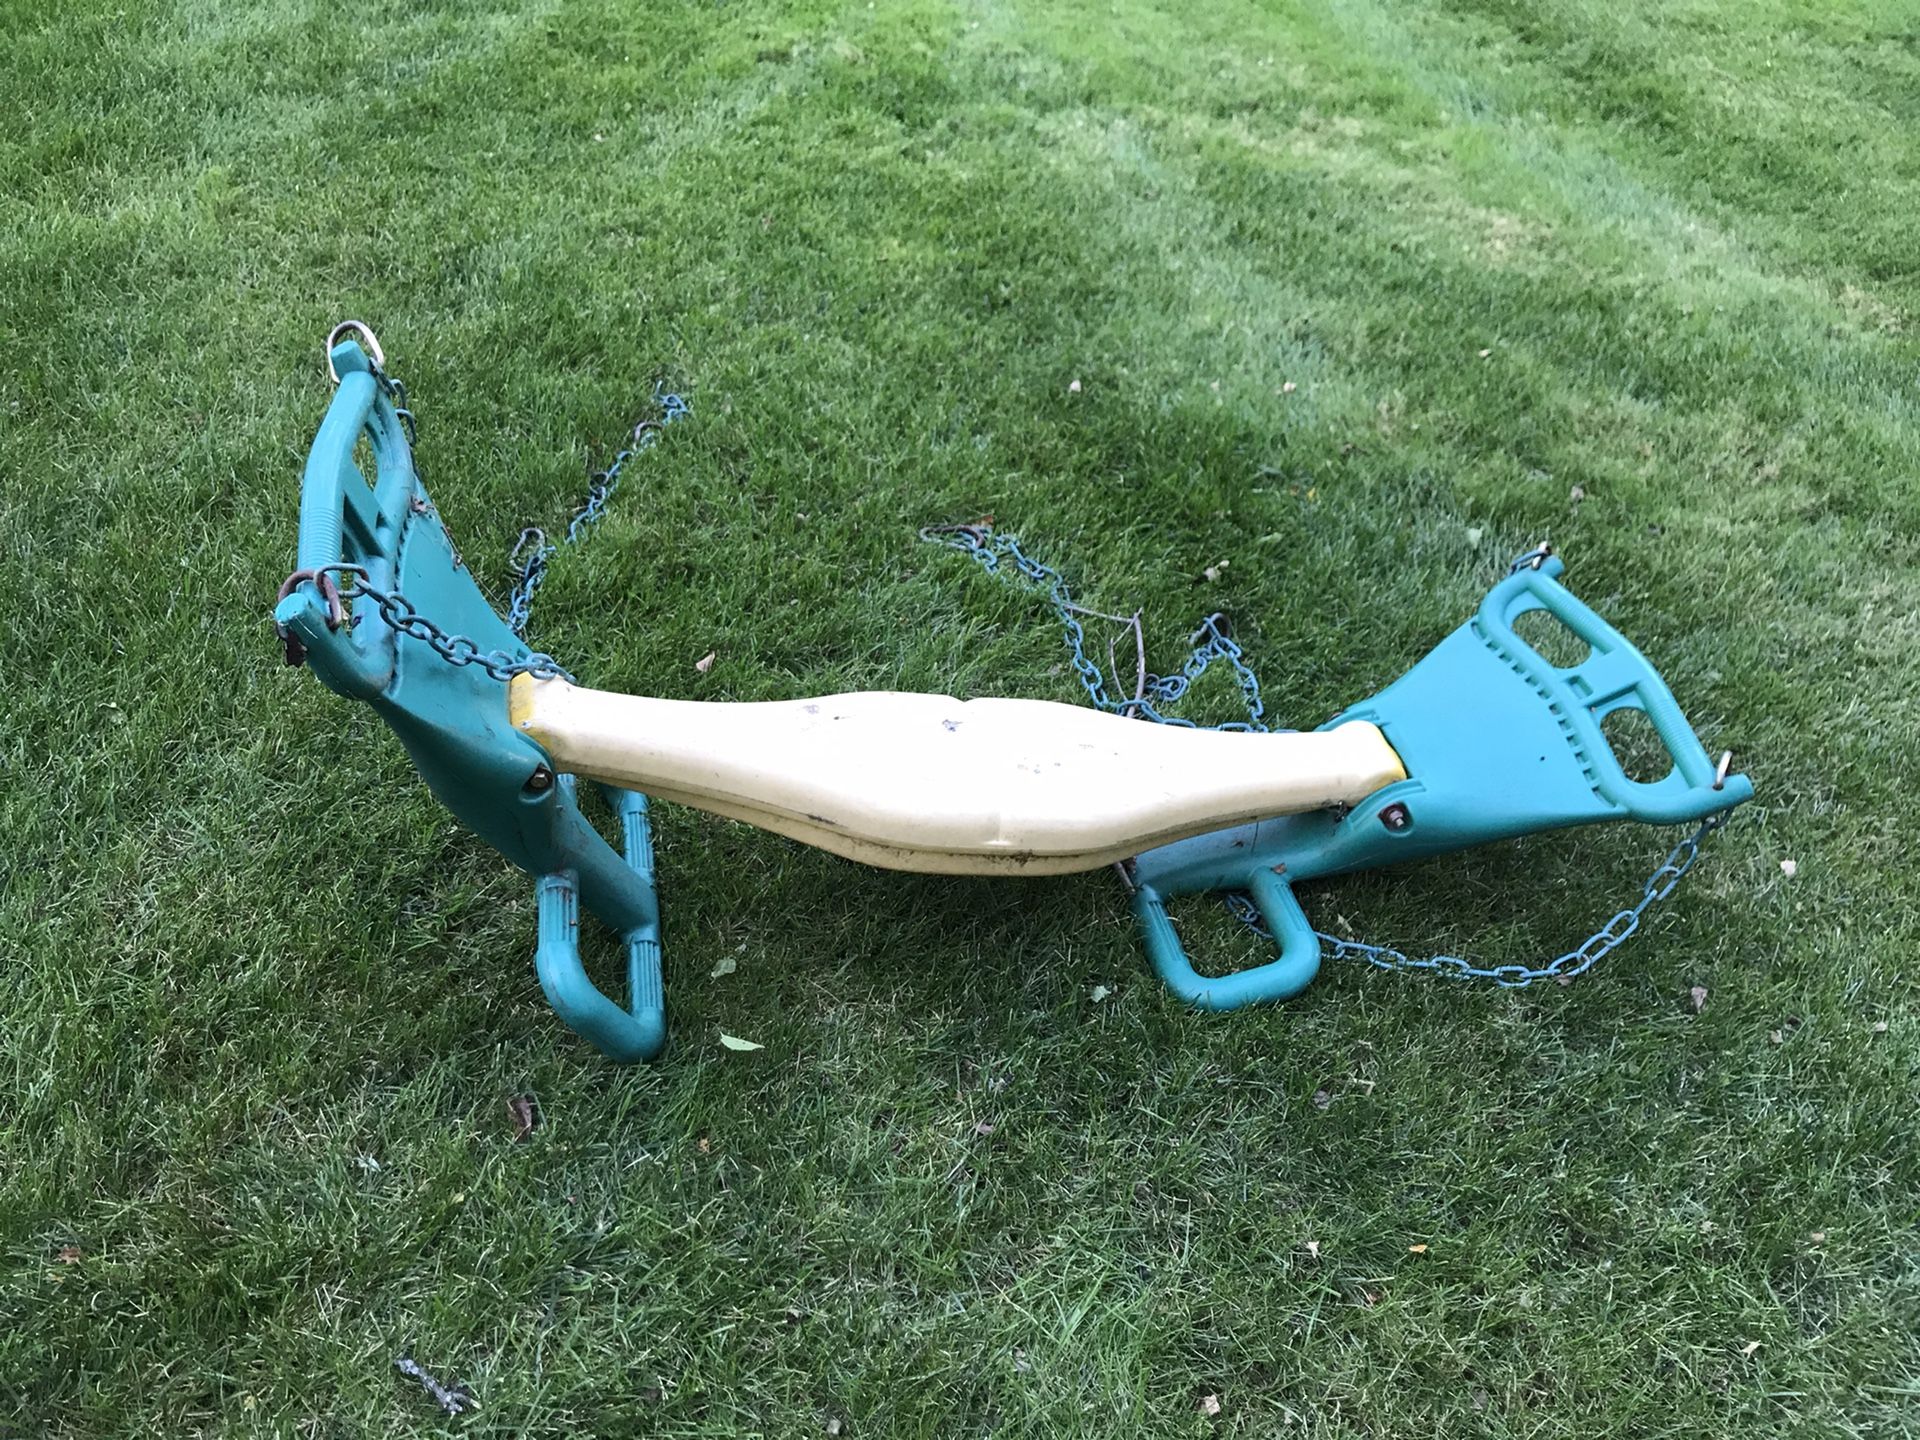 Dual ride glider for swing set